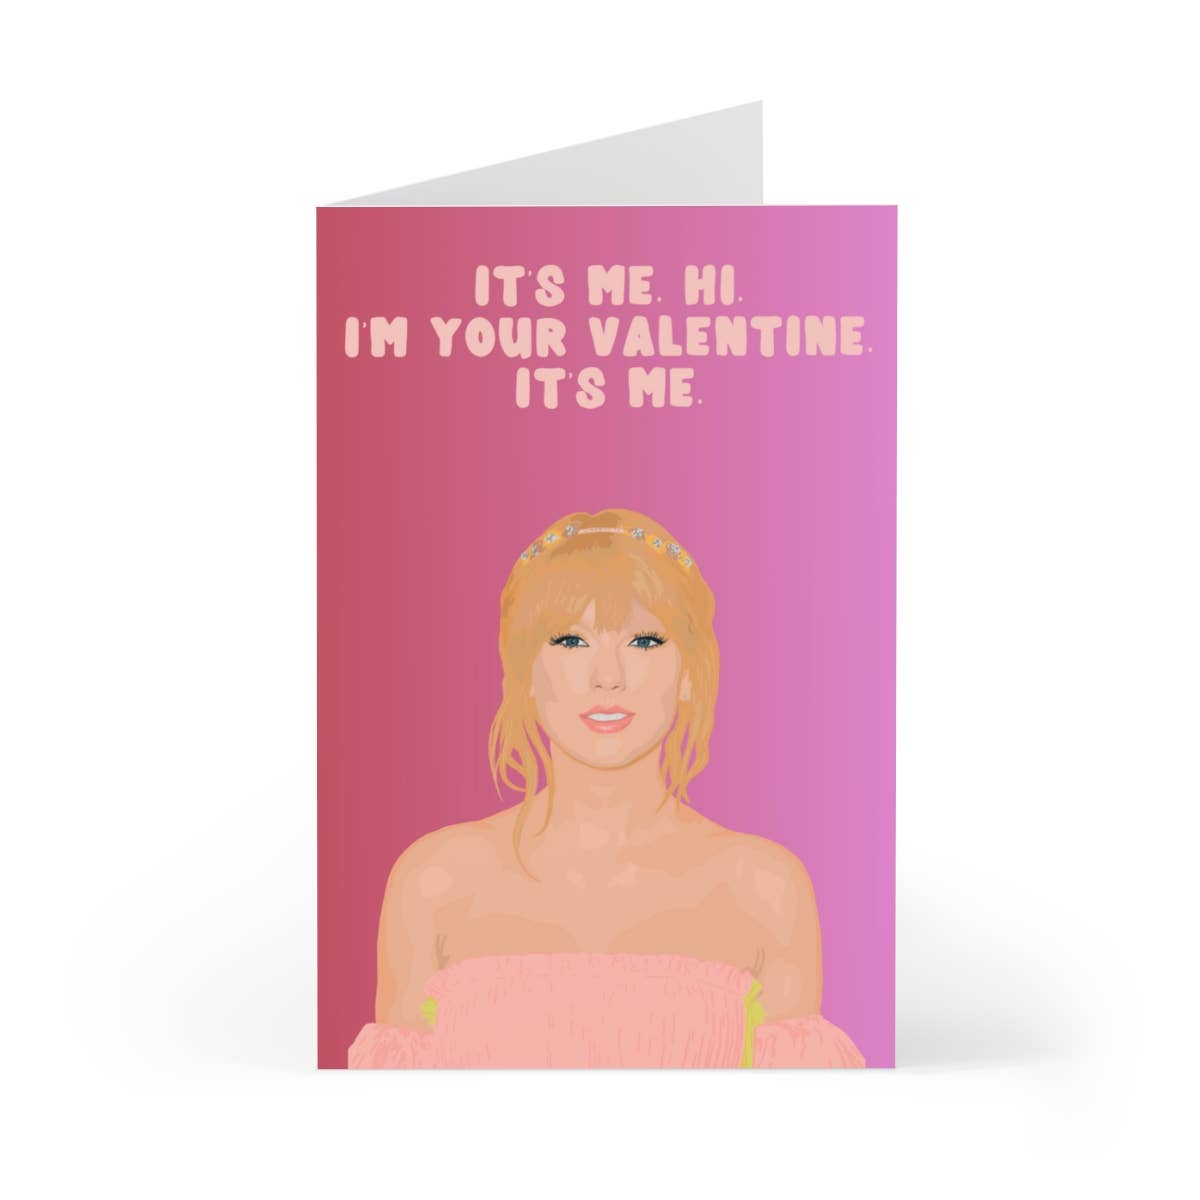 Taylor Valentine's Day Card